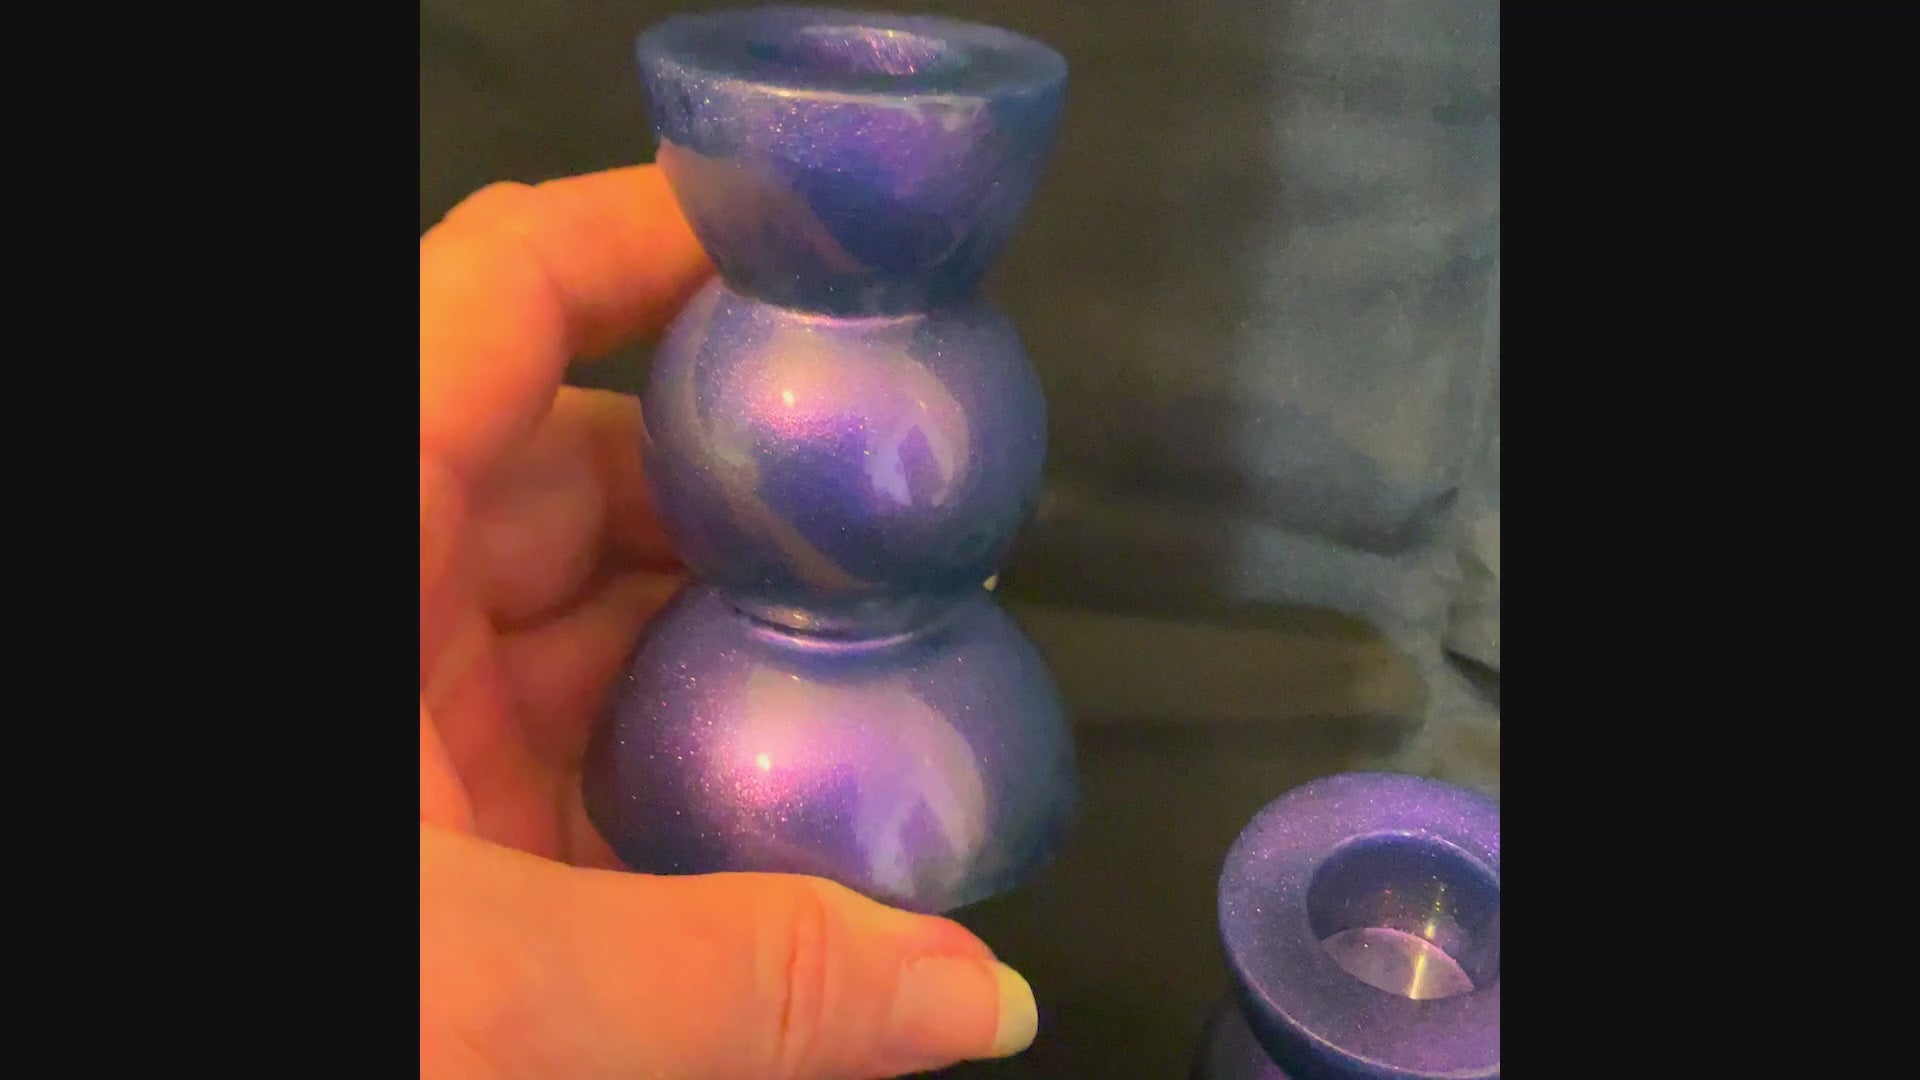 Handmade Pearly Color Shift Purple Green Blue Resin Rounded Geometric Candlestick Holders video showing how the color shifts from purple to green and hints of blue in the light.